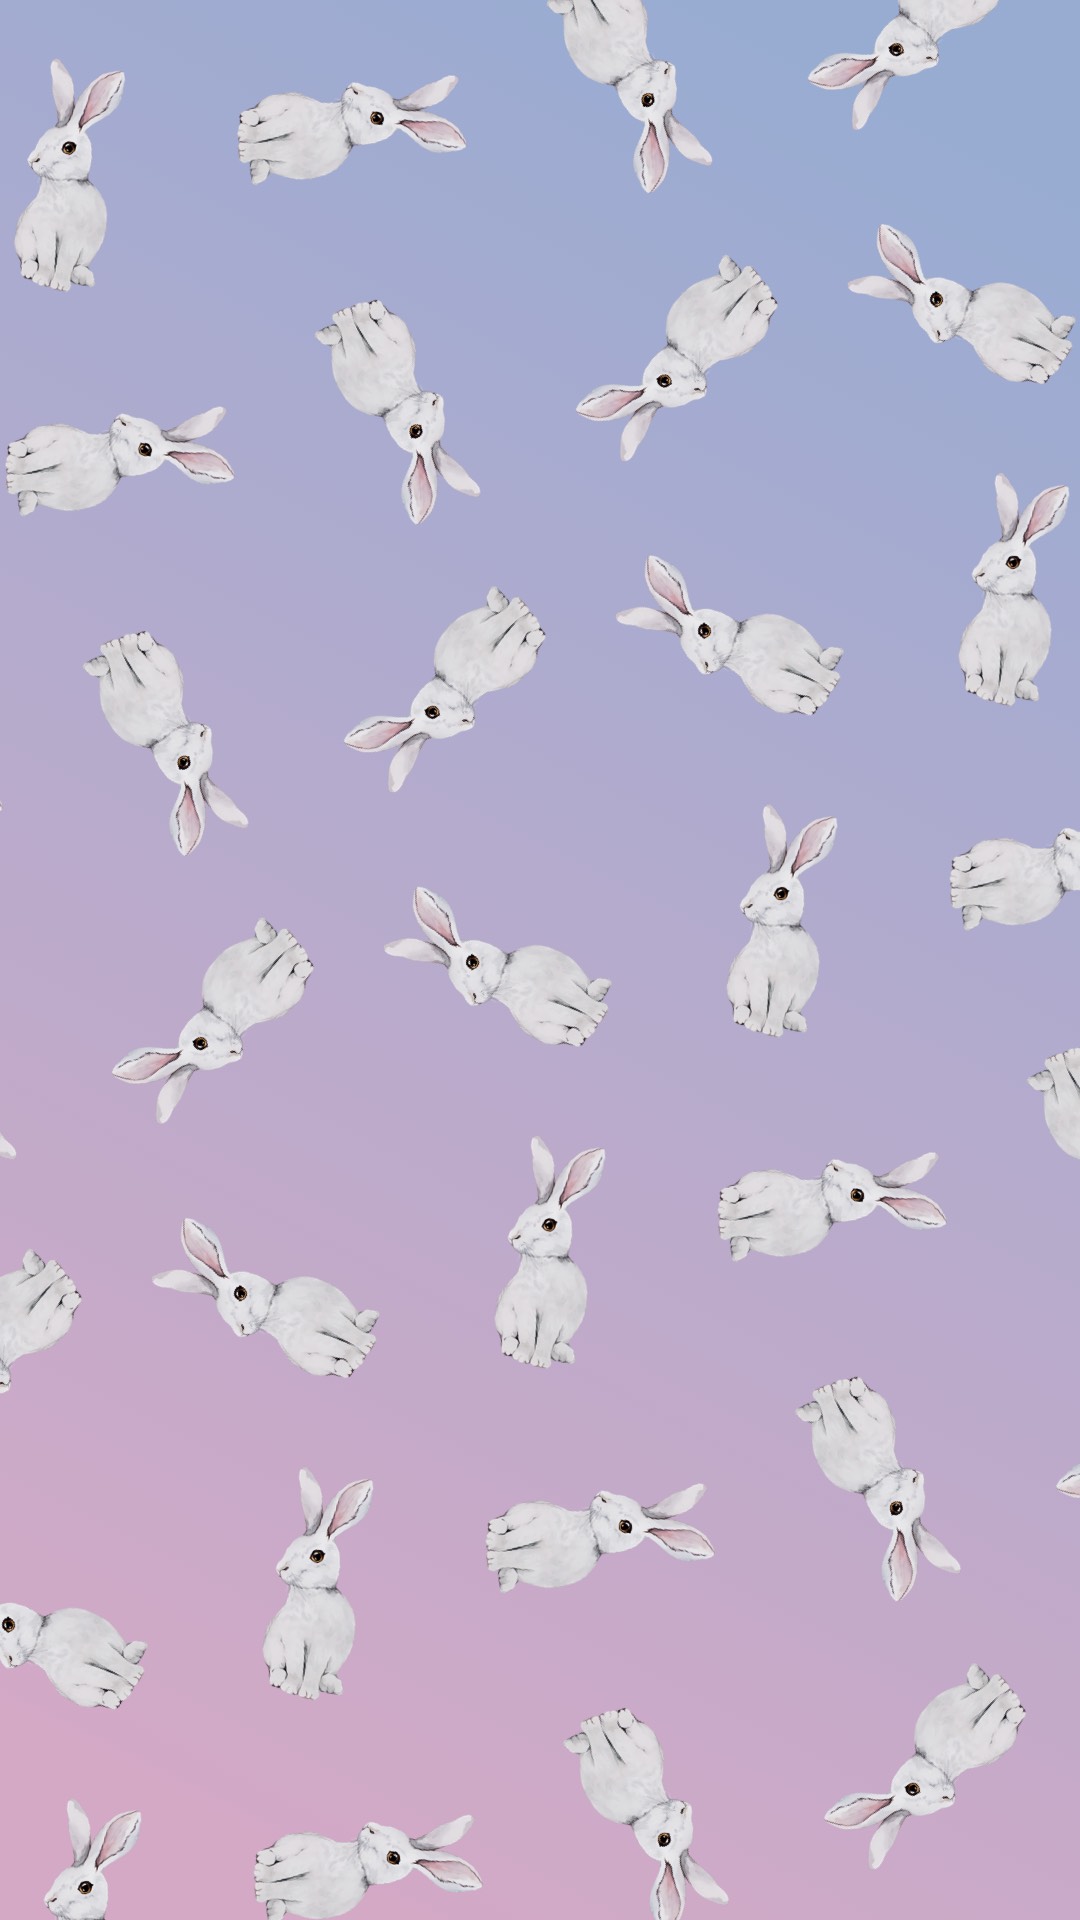 A Group Of White Rabbits Flying Through The Air Zoom Backgrounds Template